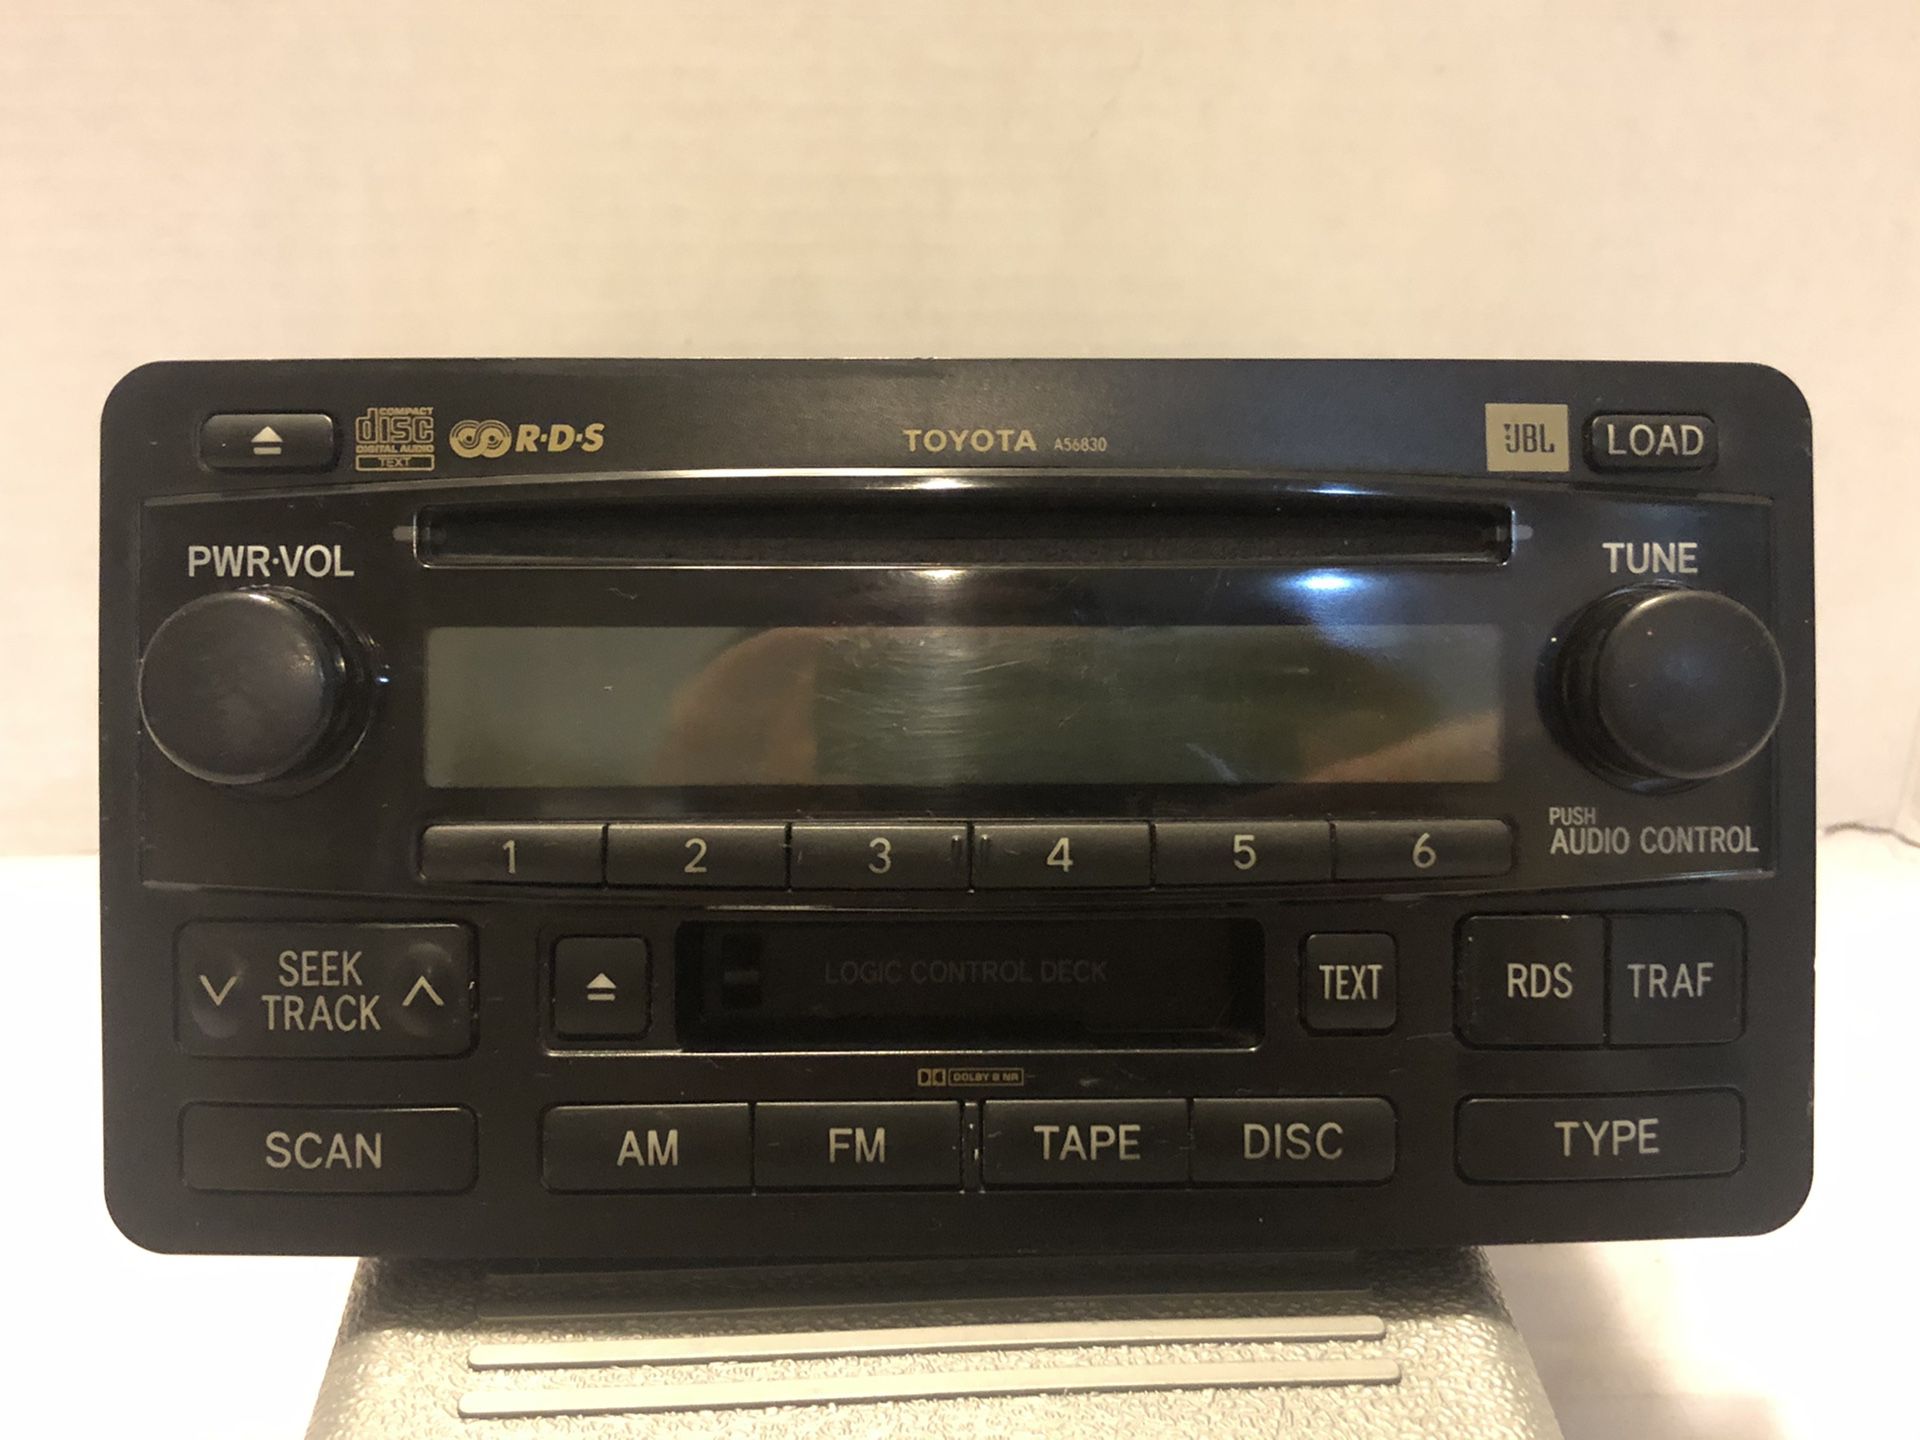 OEM Toyota JBL RDS Radio Cassette CD player #86120-0C140. Untested. Great condition